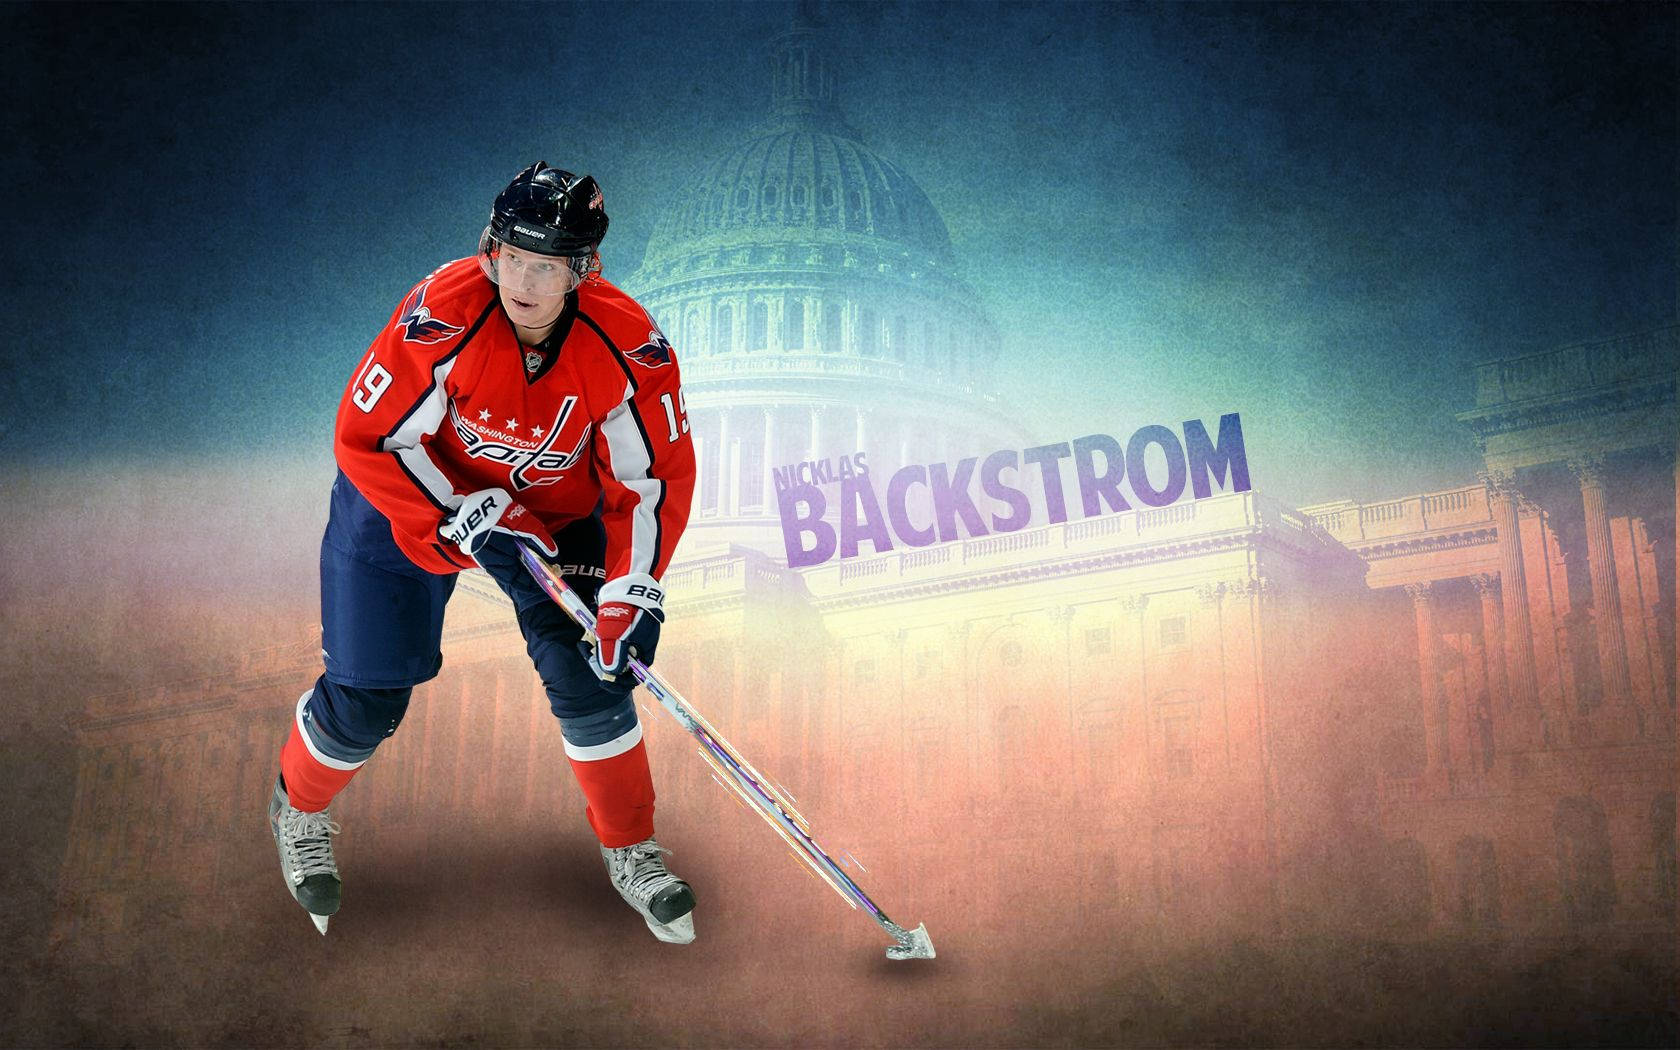 Download Nicklas Backstrom in Action with Oshie and Ovechkin